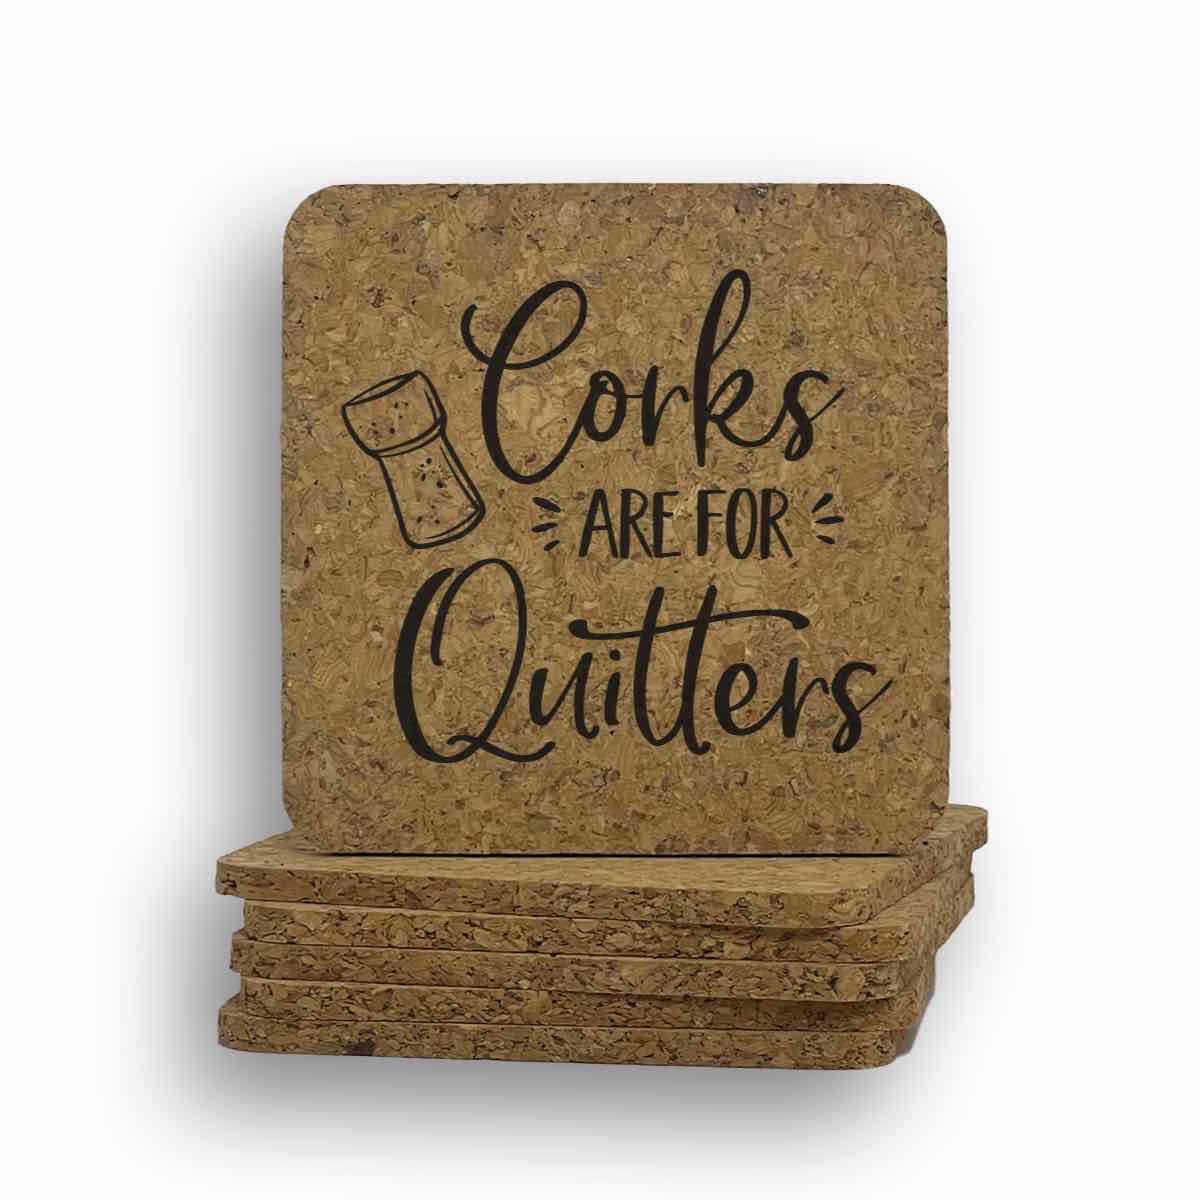 Corks Are For Quitters Coaster